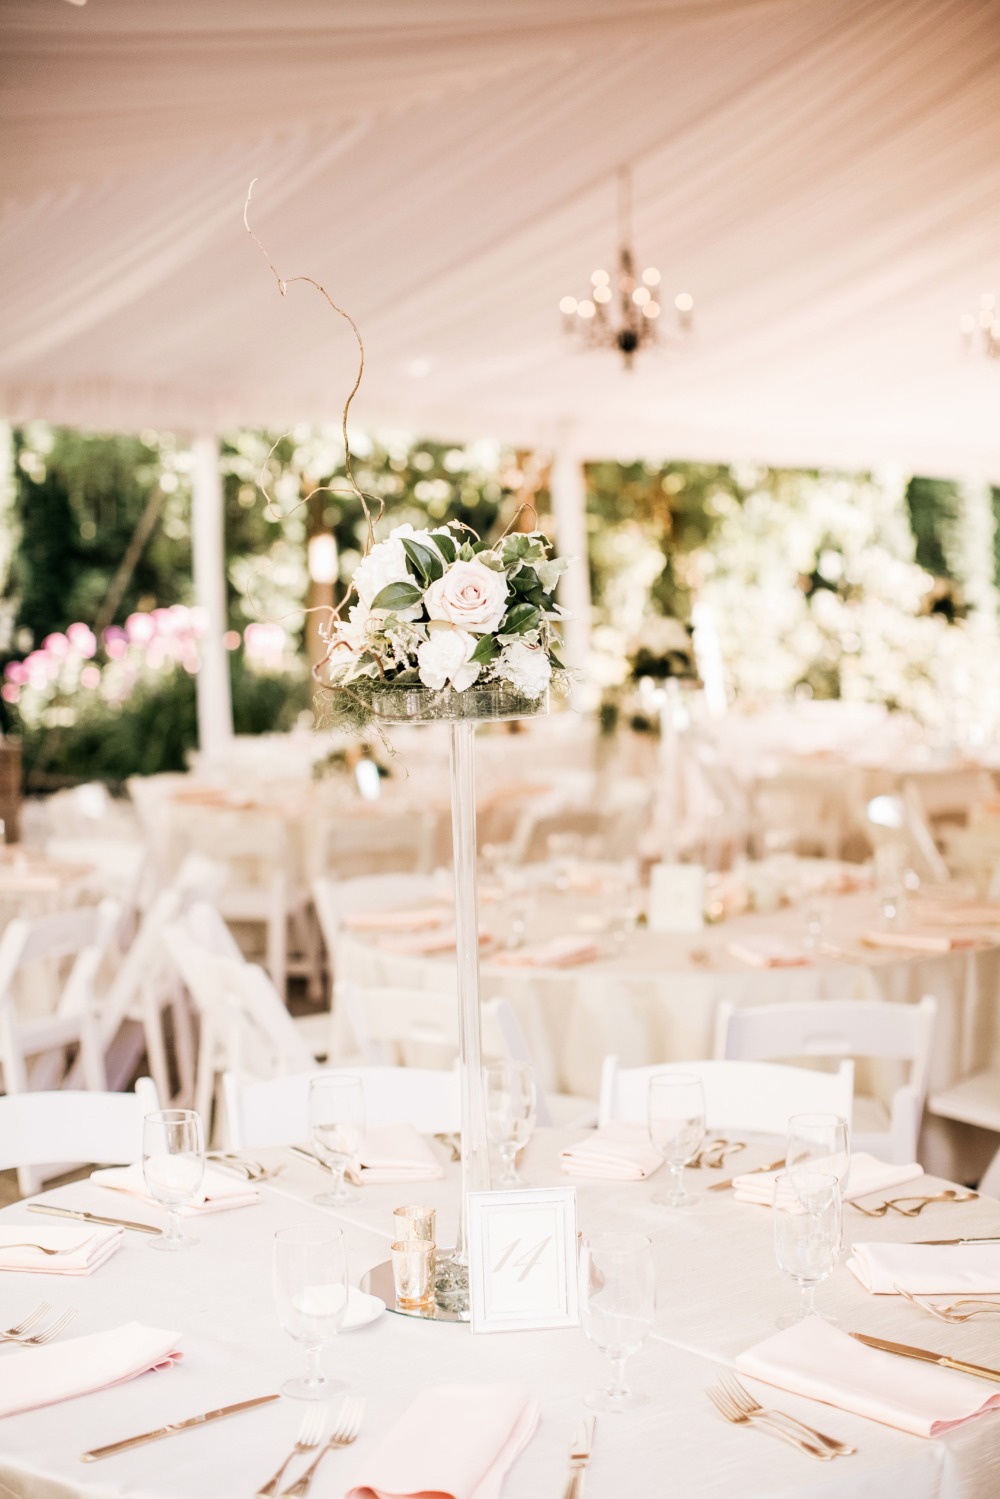 Tall elegant centerpiece with white roses